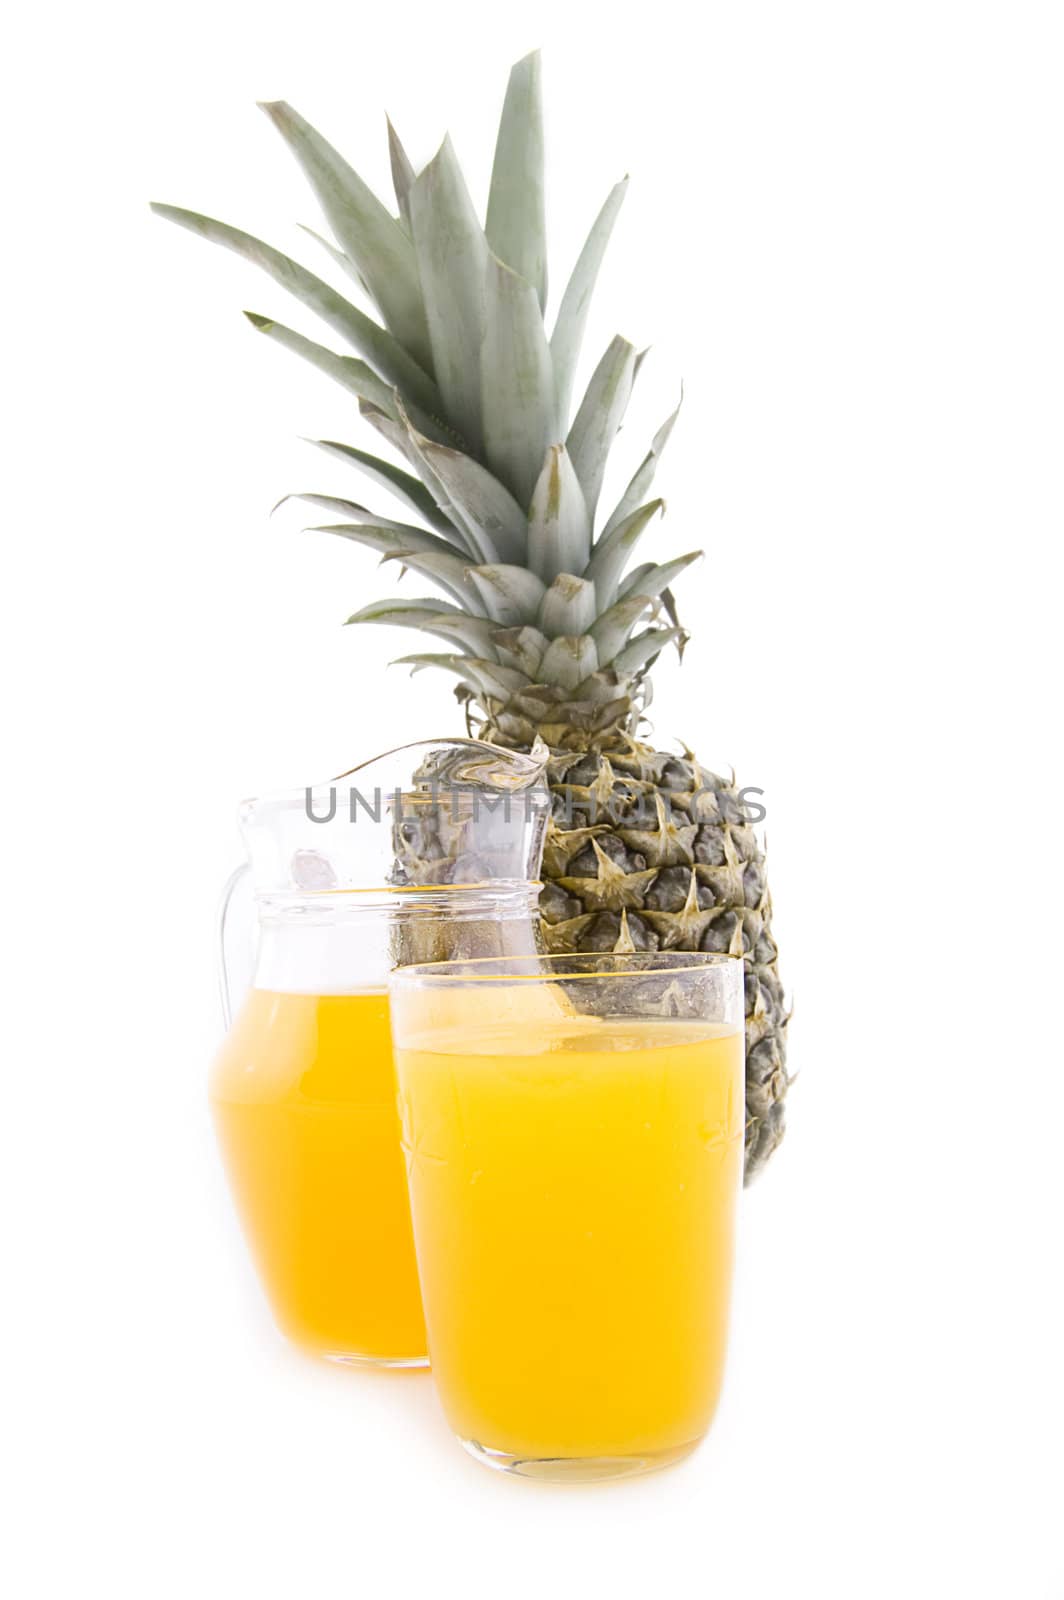 Pineapple juice by Angel_a